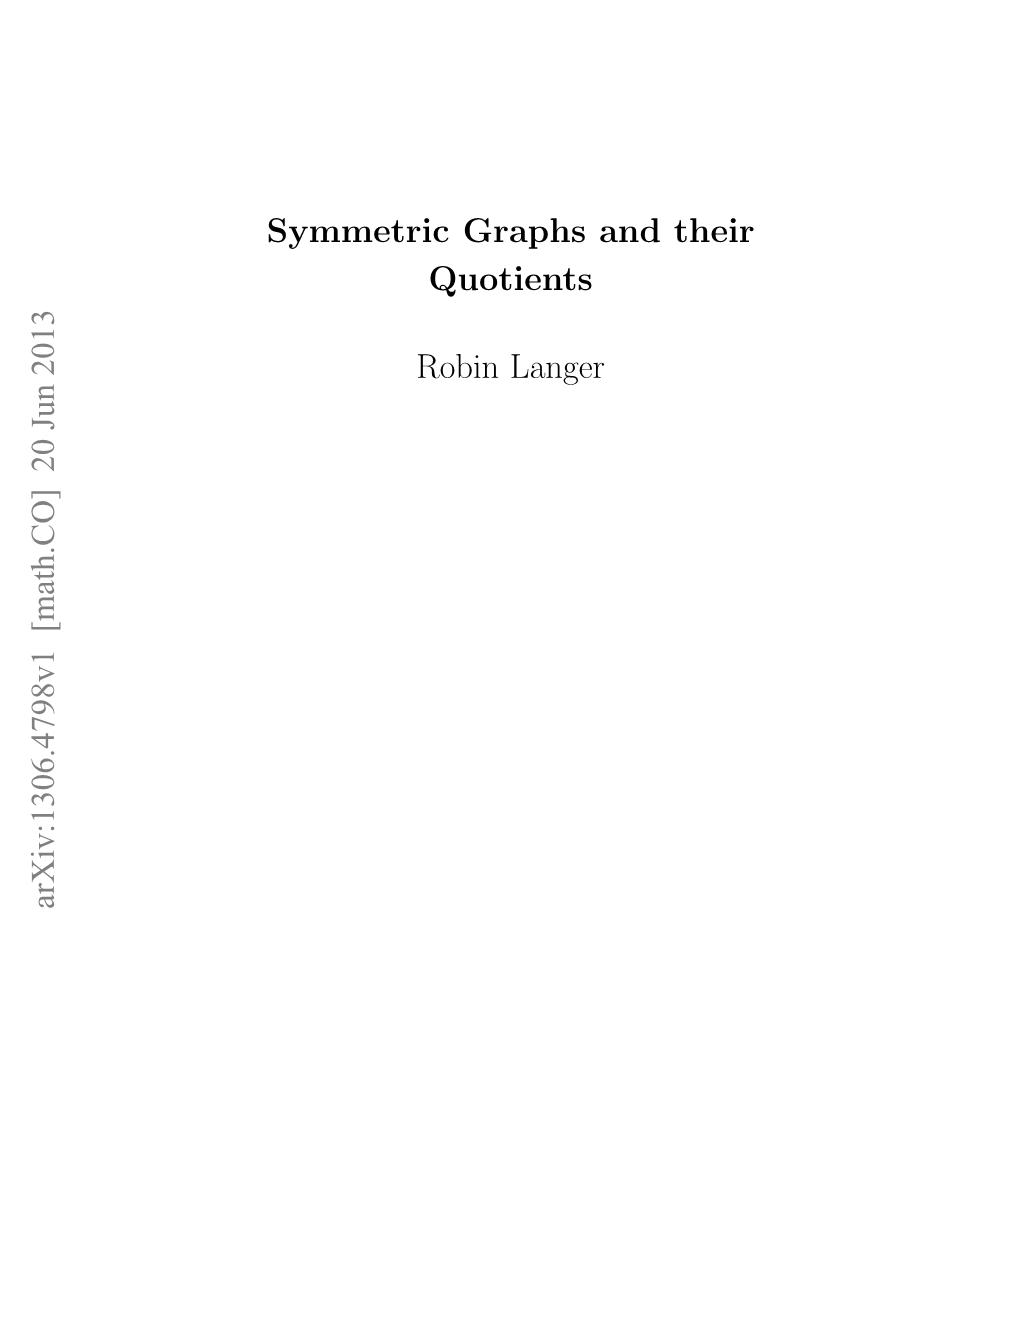 Symmetric Graphs and Their Quotients